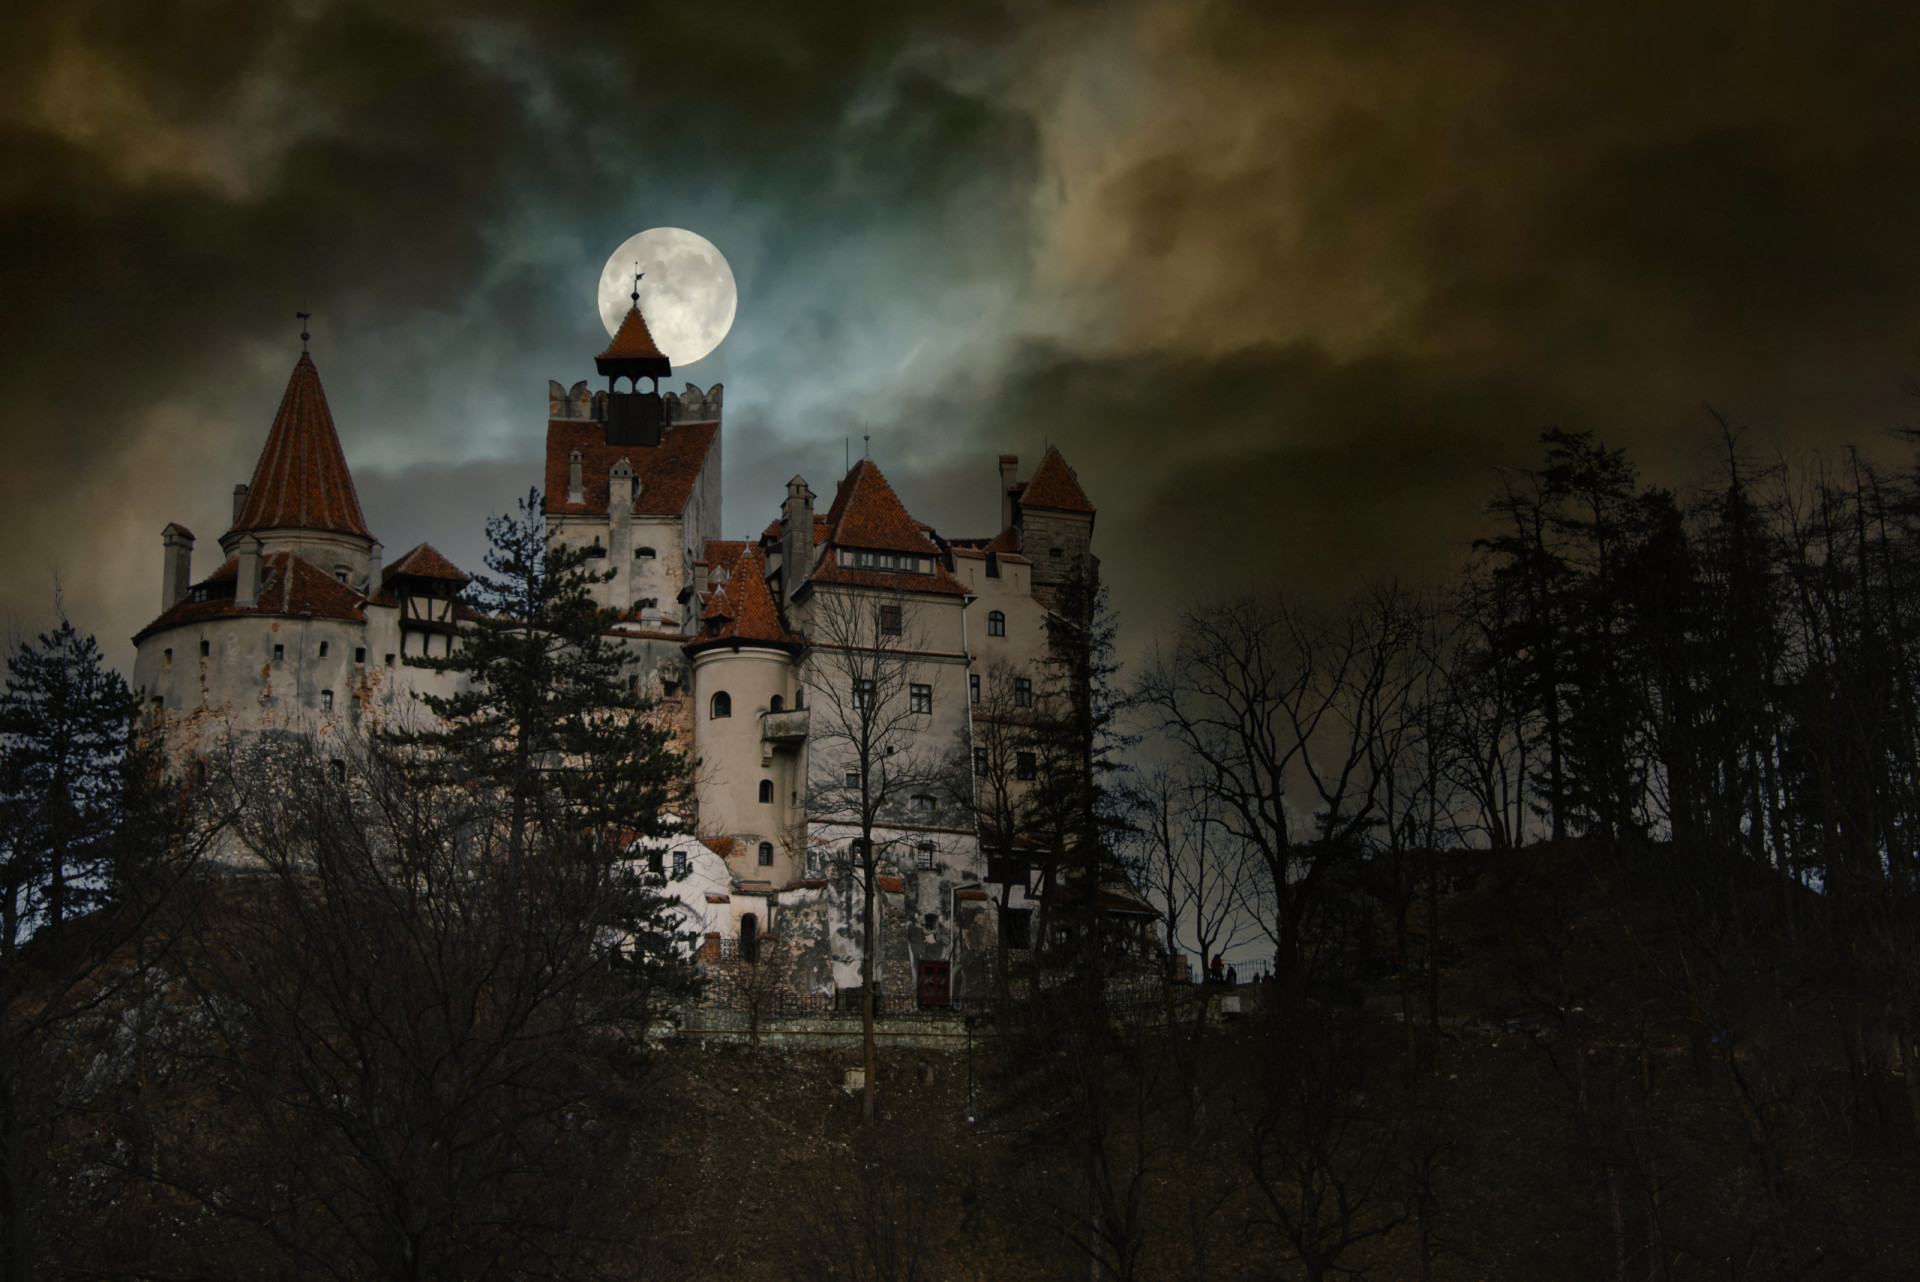 <p>The legendary 'Dracula' by Bram Stoker is synonymous with the mythical Transylvania. While the vampire's castle may be a product of fiction, visitors to Transylvania can explore the region's stunning landscapes, medieval castles, and folklore.</p><p><a href="https://www.msn.com/en-us/community/channel/vid-7xx8mnucu55yw63we9va2gwr7uihbxwc68fxqp25x6tg4ftibpra?cvid=94631541bc0f4f89bfd59158d696ad7e">Follow us and access great exclusive content every day</a></p>